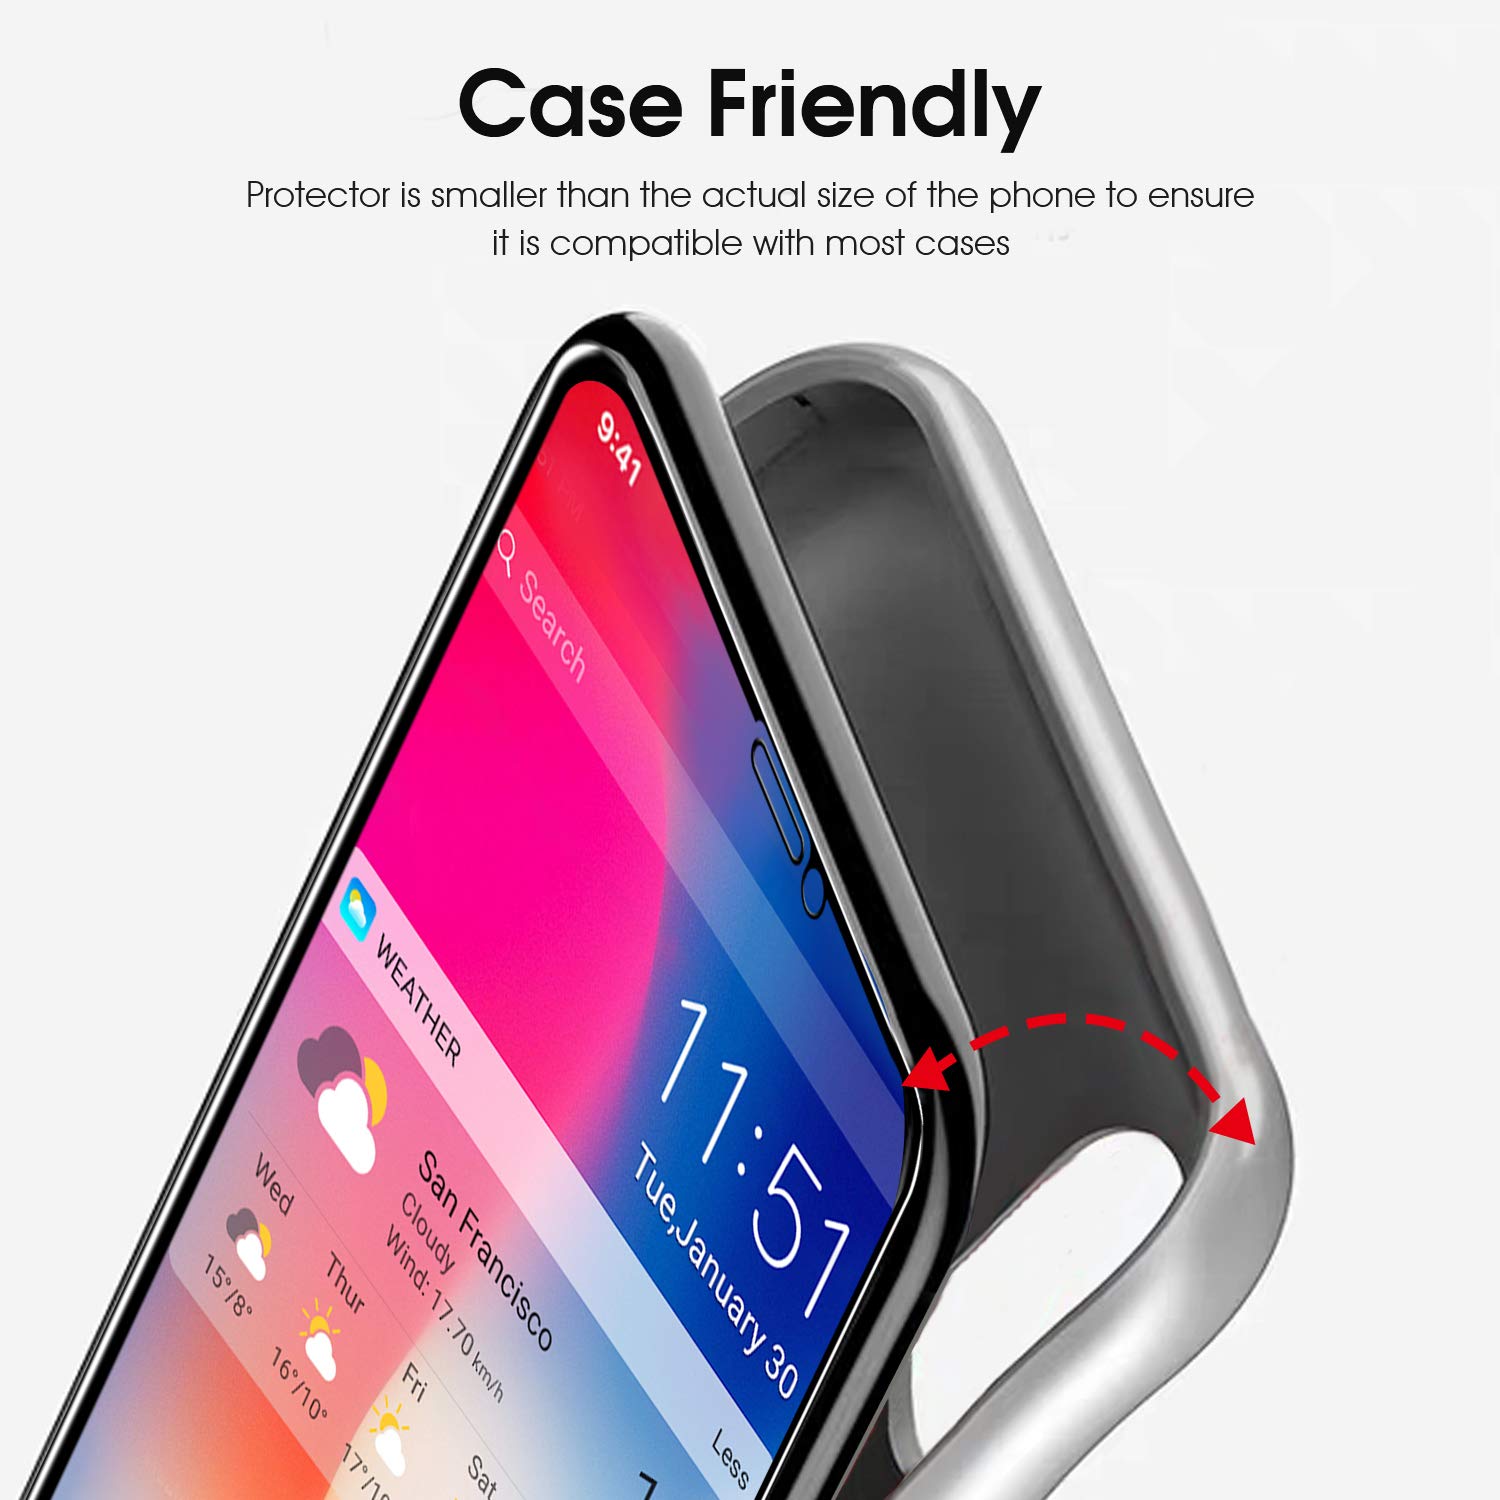 OTAO Privacy Screen Protector for iPhone 11/iPhone XR 6.1inch True 28°Anti Spy Tempered Glass Full-Coverage (2 -pack)